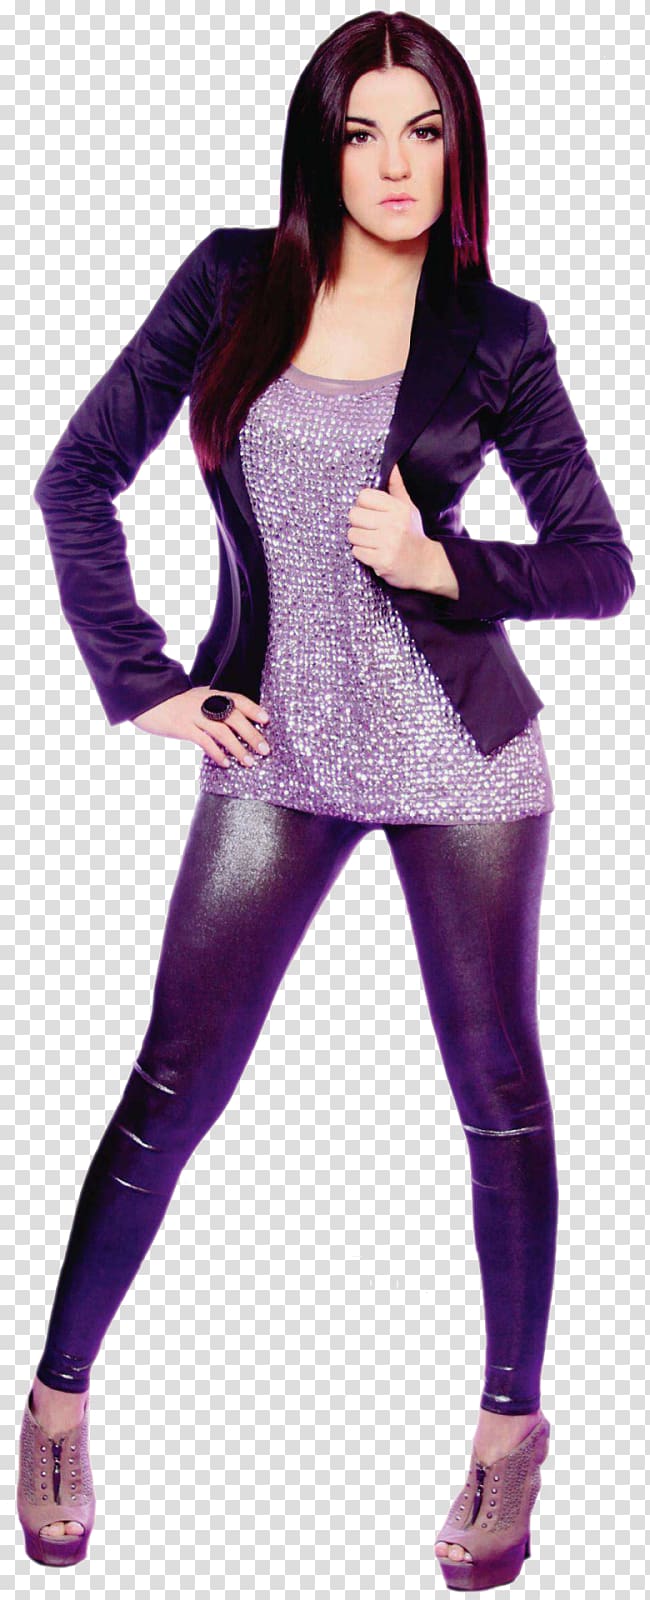 Maite Perroni Mexico Rebelde RBD, actor transparent background PNG clipart